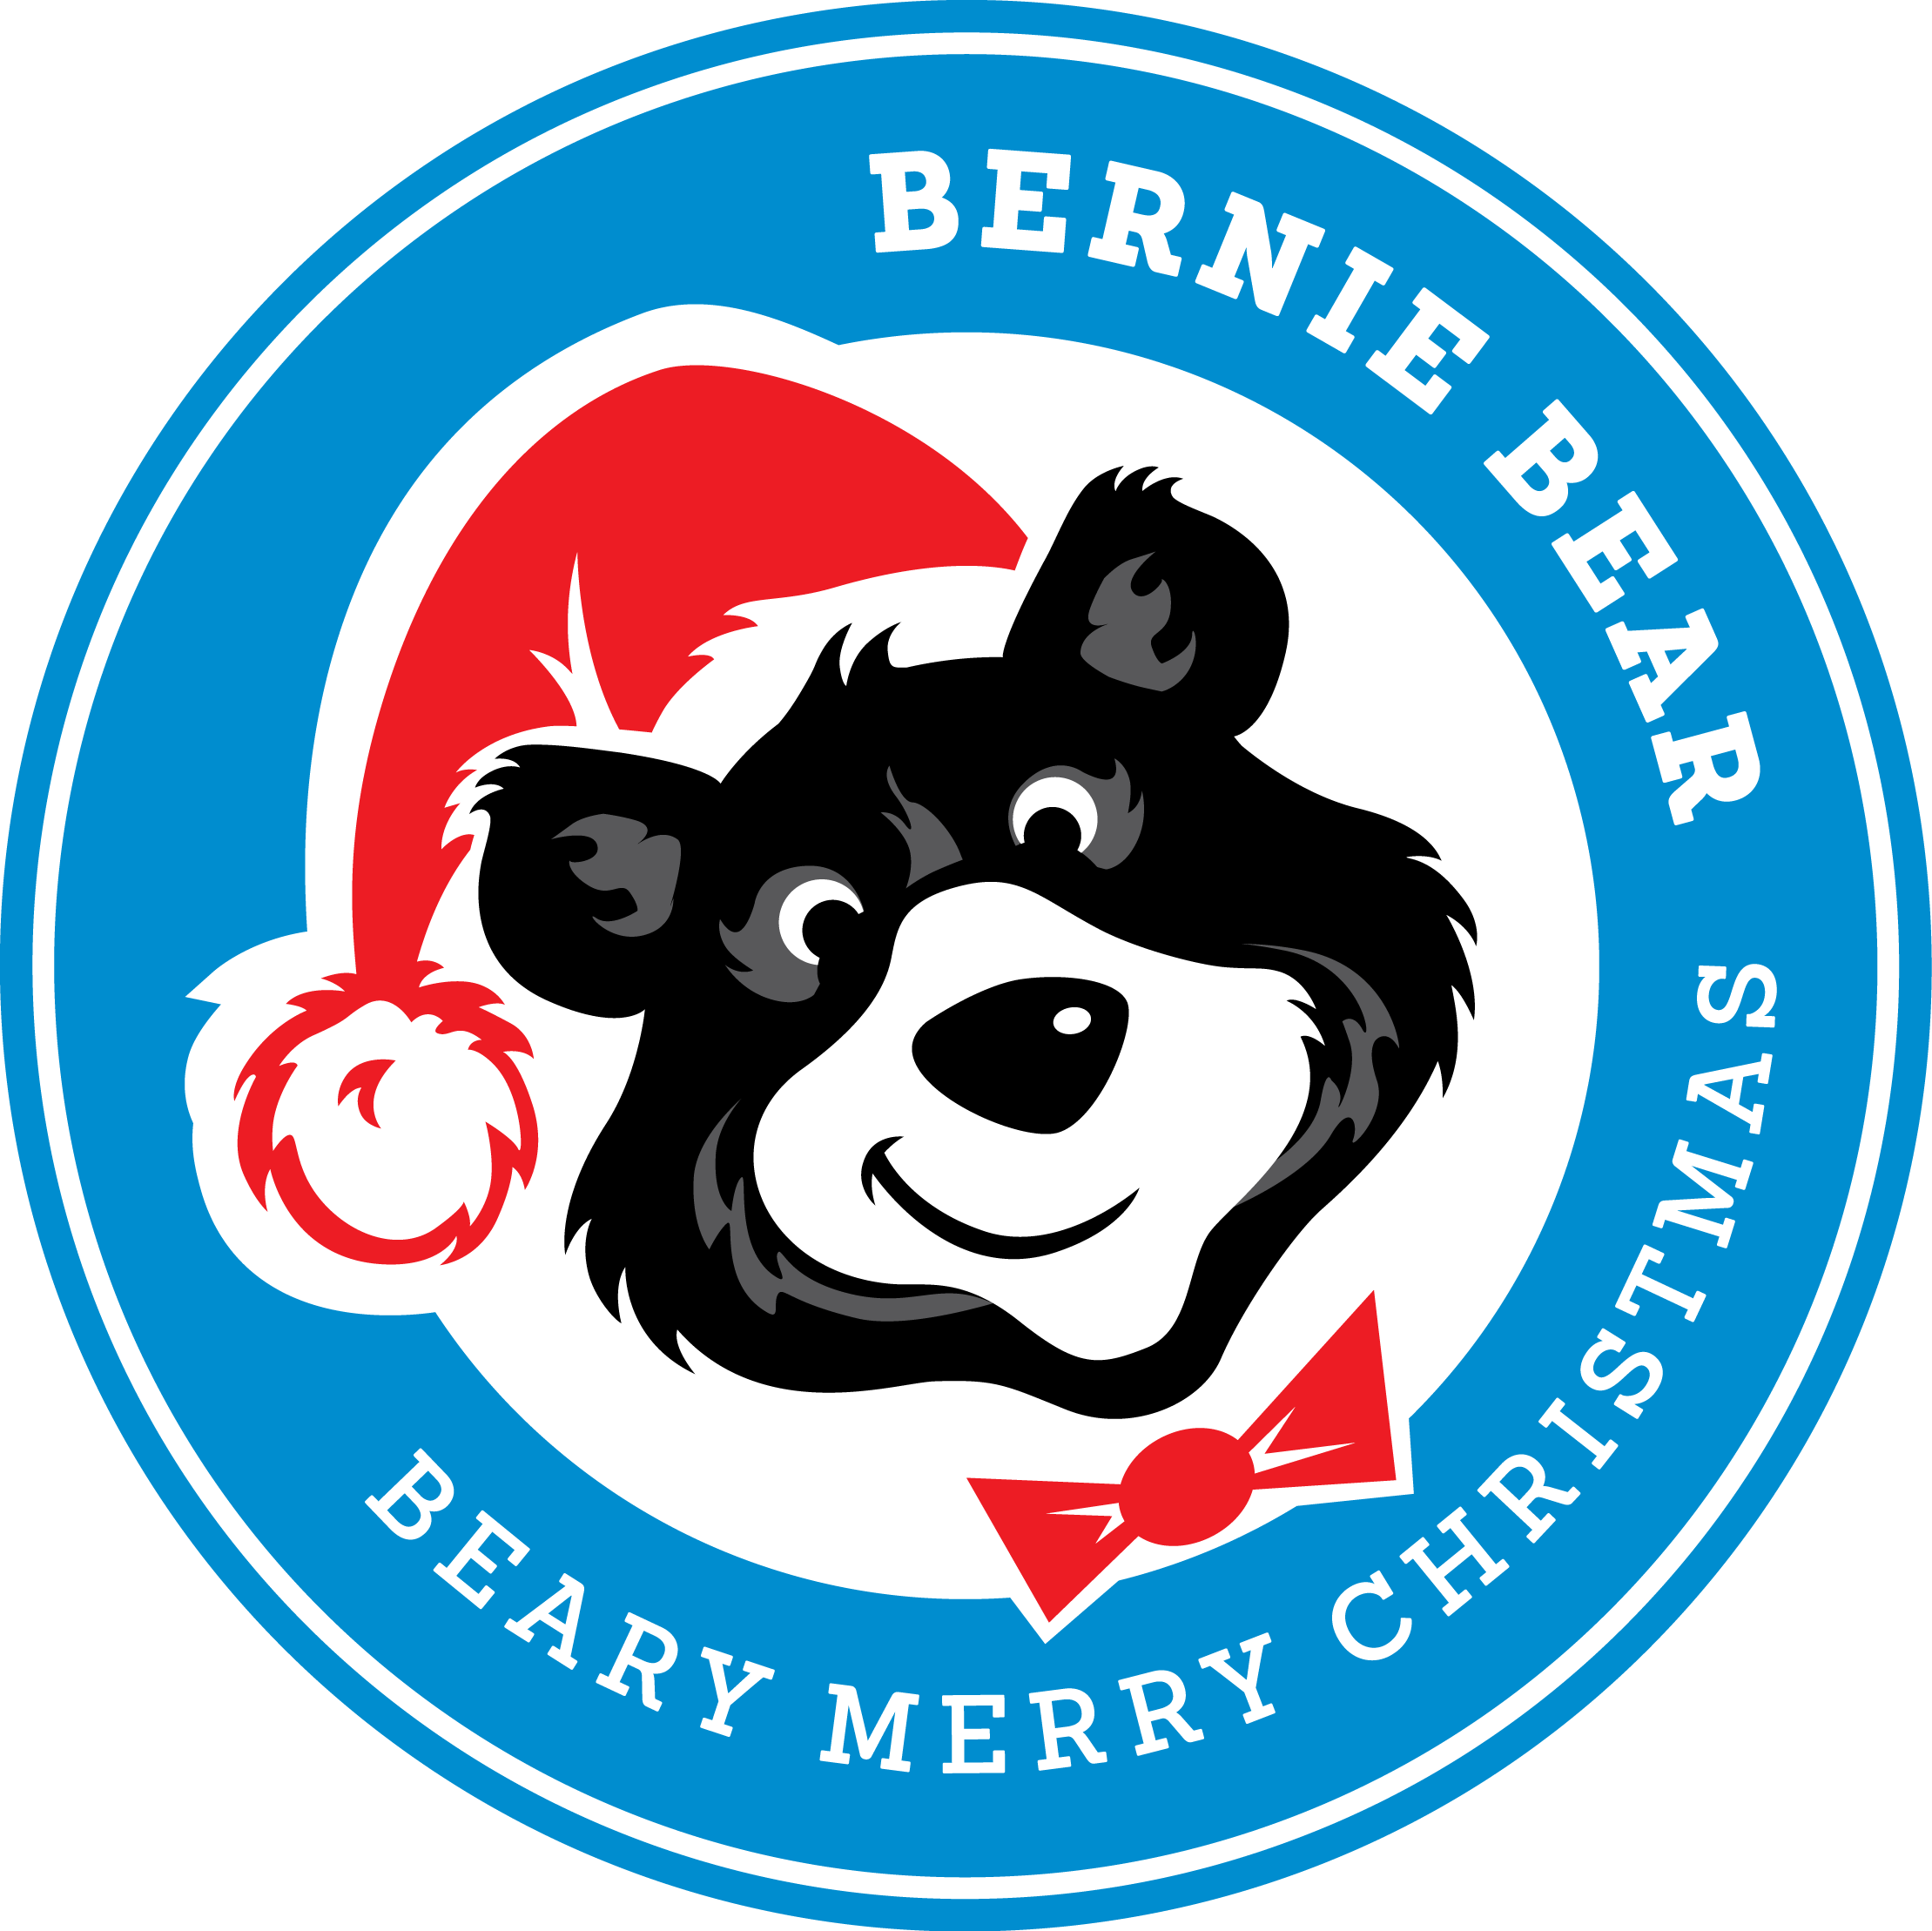 Xmass Logo - Beary Merry Christmas. Beary Merry Christmas is brought to you